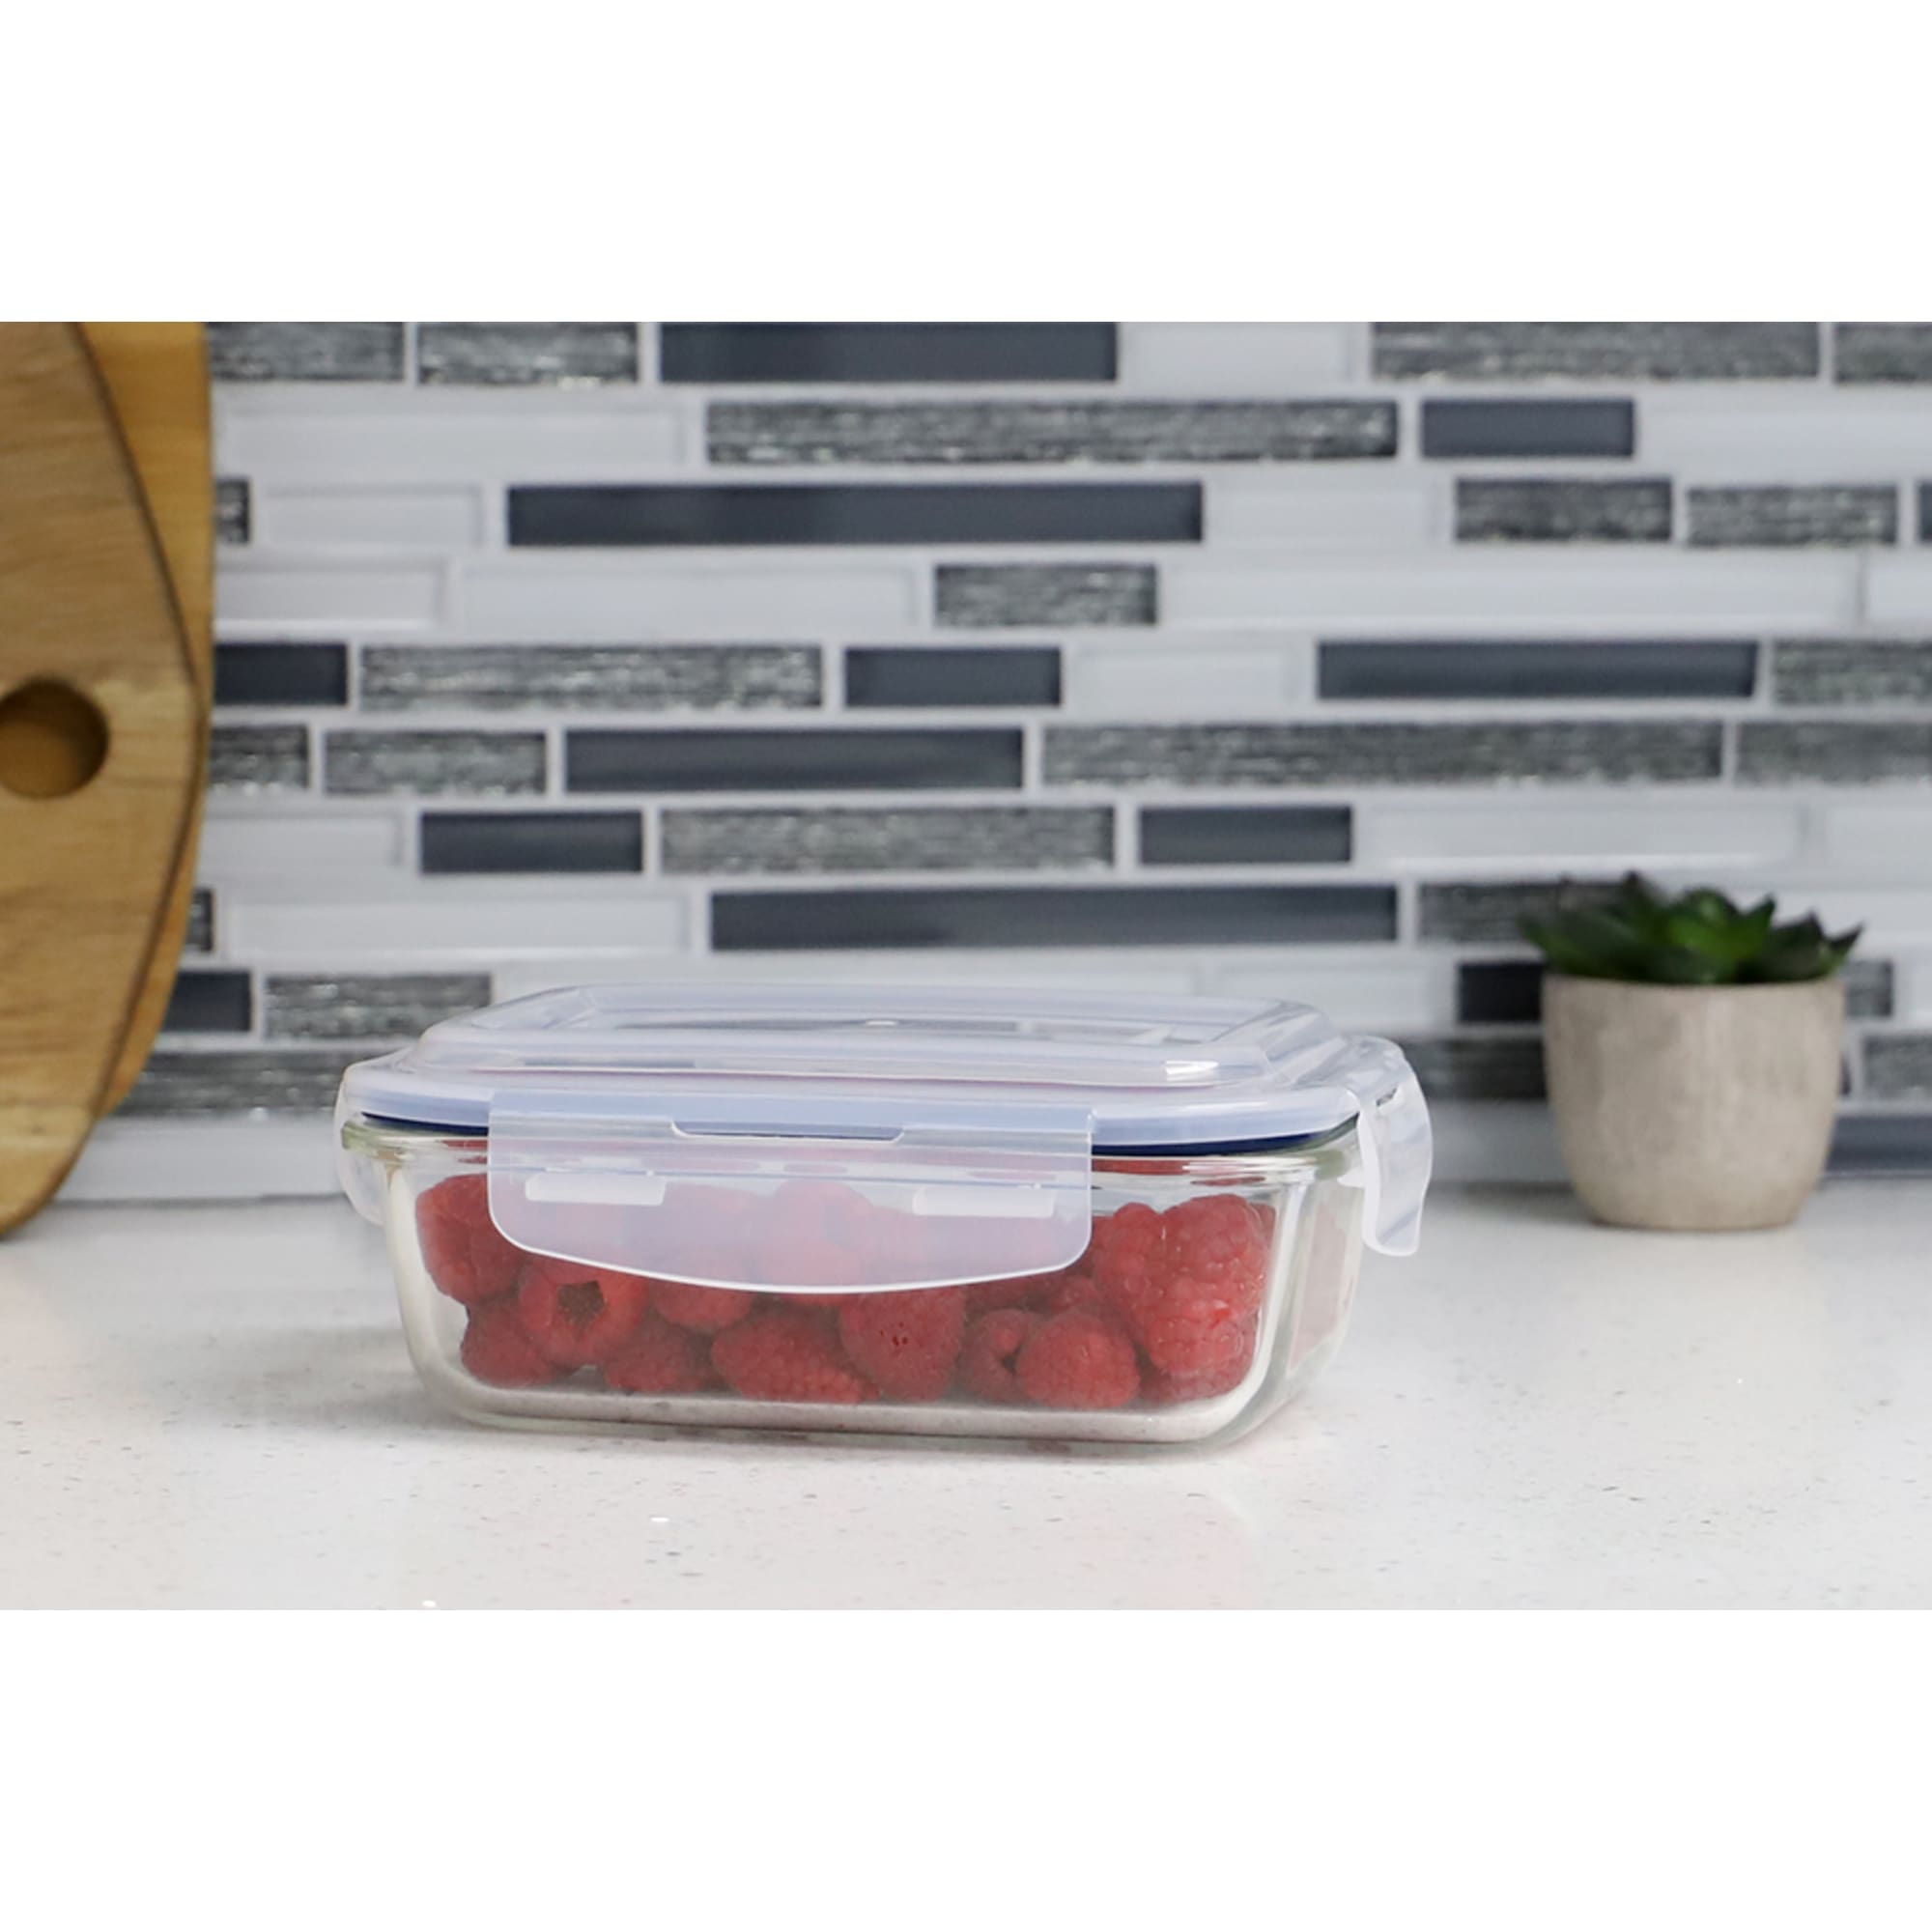 Michael Graves Design 21 Ounce High Borosilicate Glass Rectangle Food Storage Container with Indigo Rubber Seal $4.00 EACH, CASE PACK OF 12